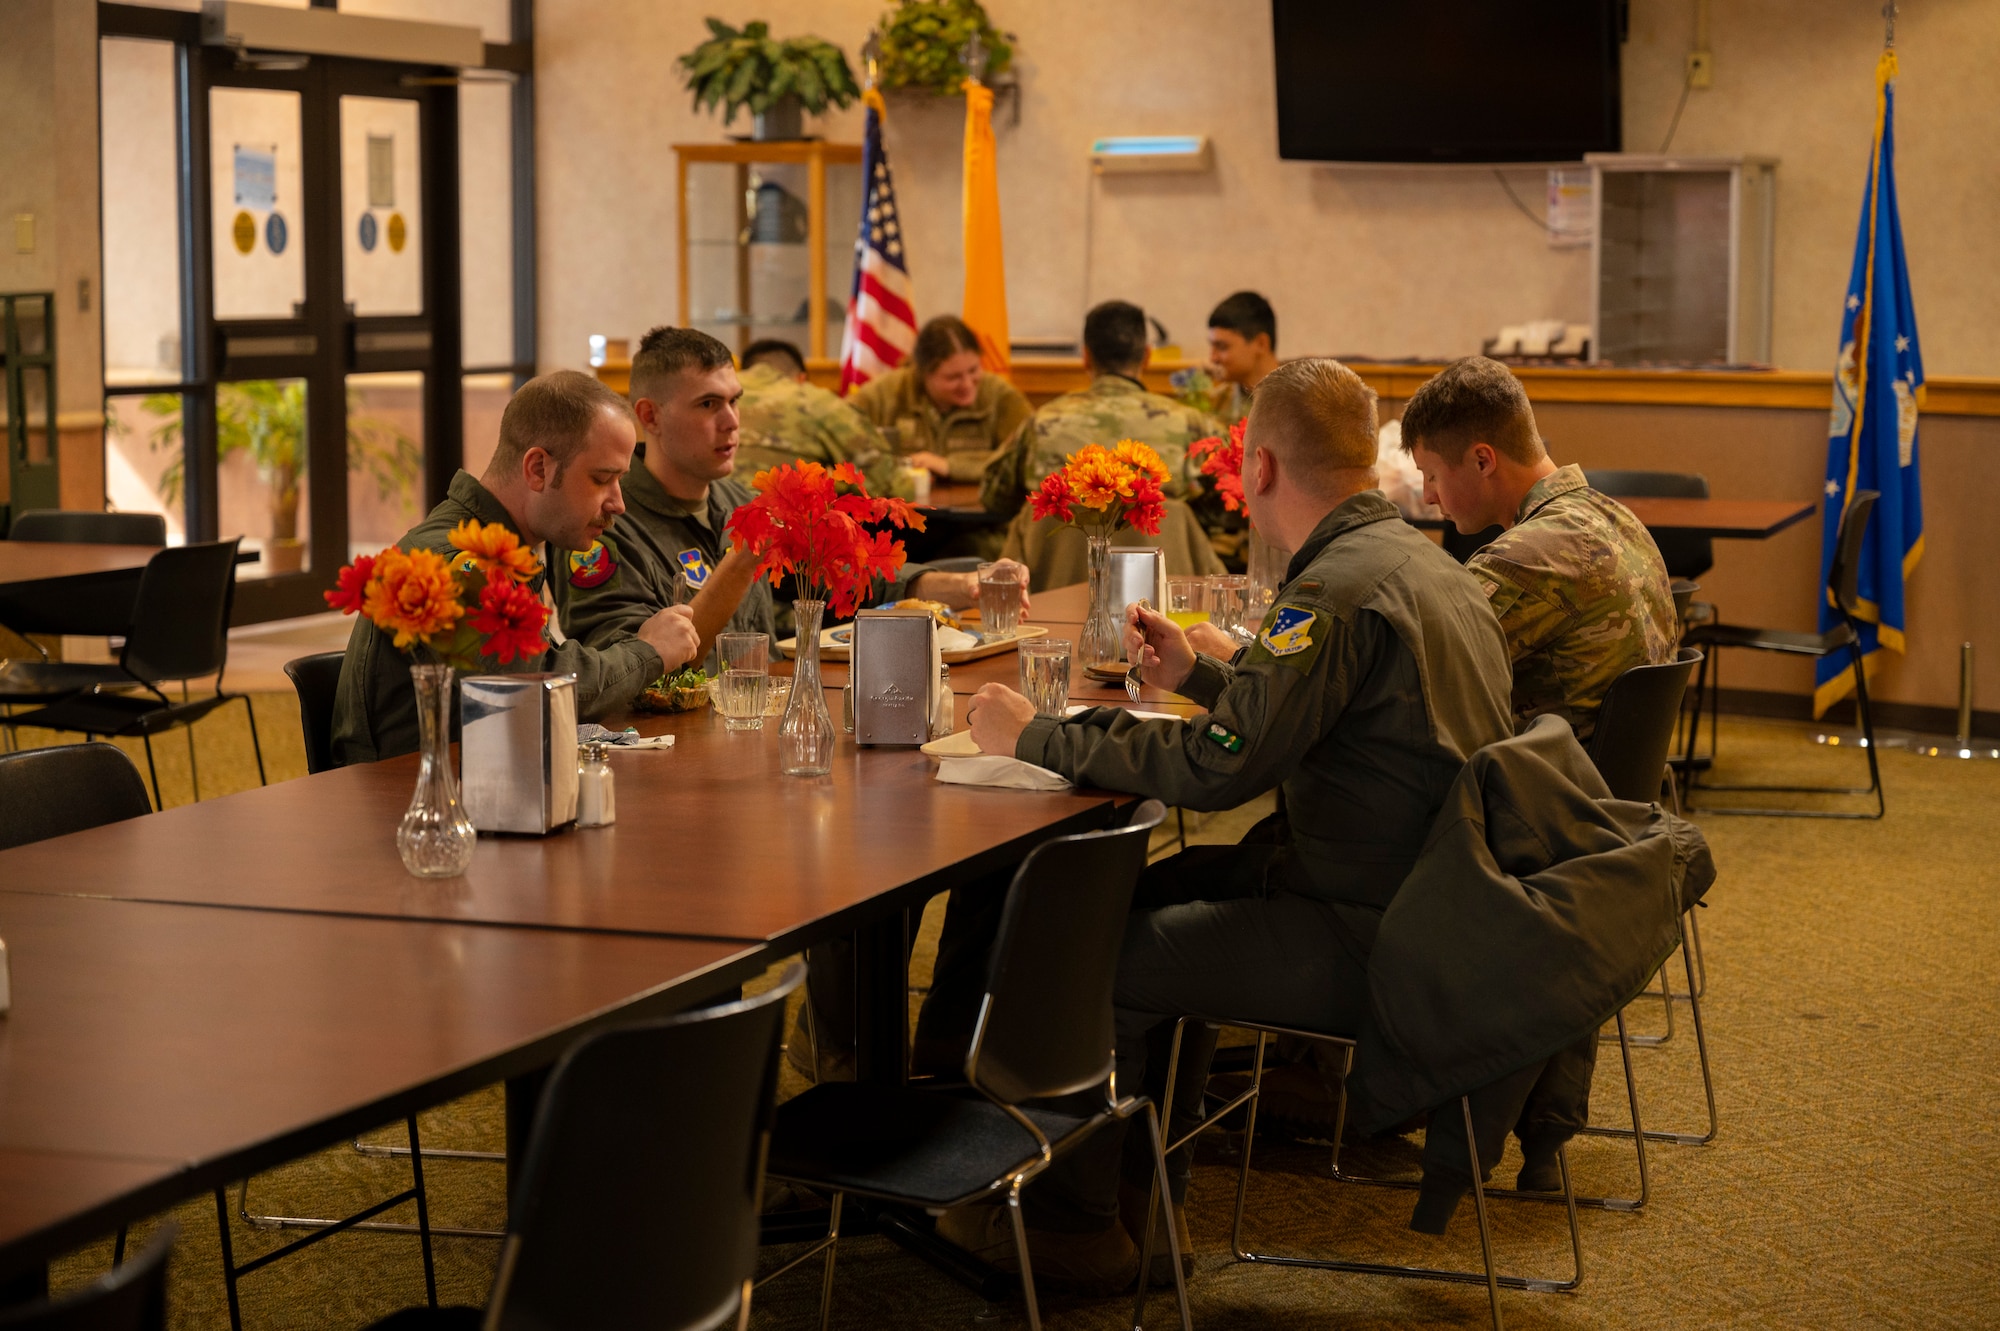 Airmen eat lunch at the Shifting Sands Dining Facility at Holloman Air Force Base, New Mexico, Nov. 18, 2022. The dining facility is a staple on all Air Force bases and is responsible for providing nutrition that is essential to an Airman's readiness. (U.S. Air Force photo by Airman 1st Class Isaiah Pedrazzini)